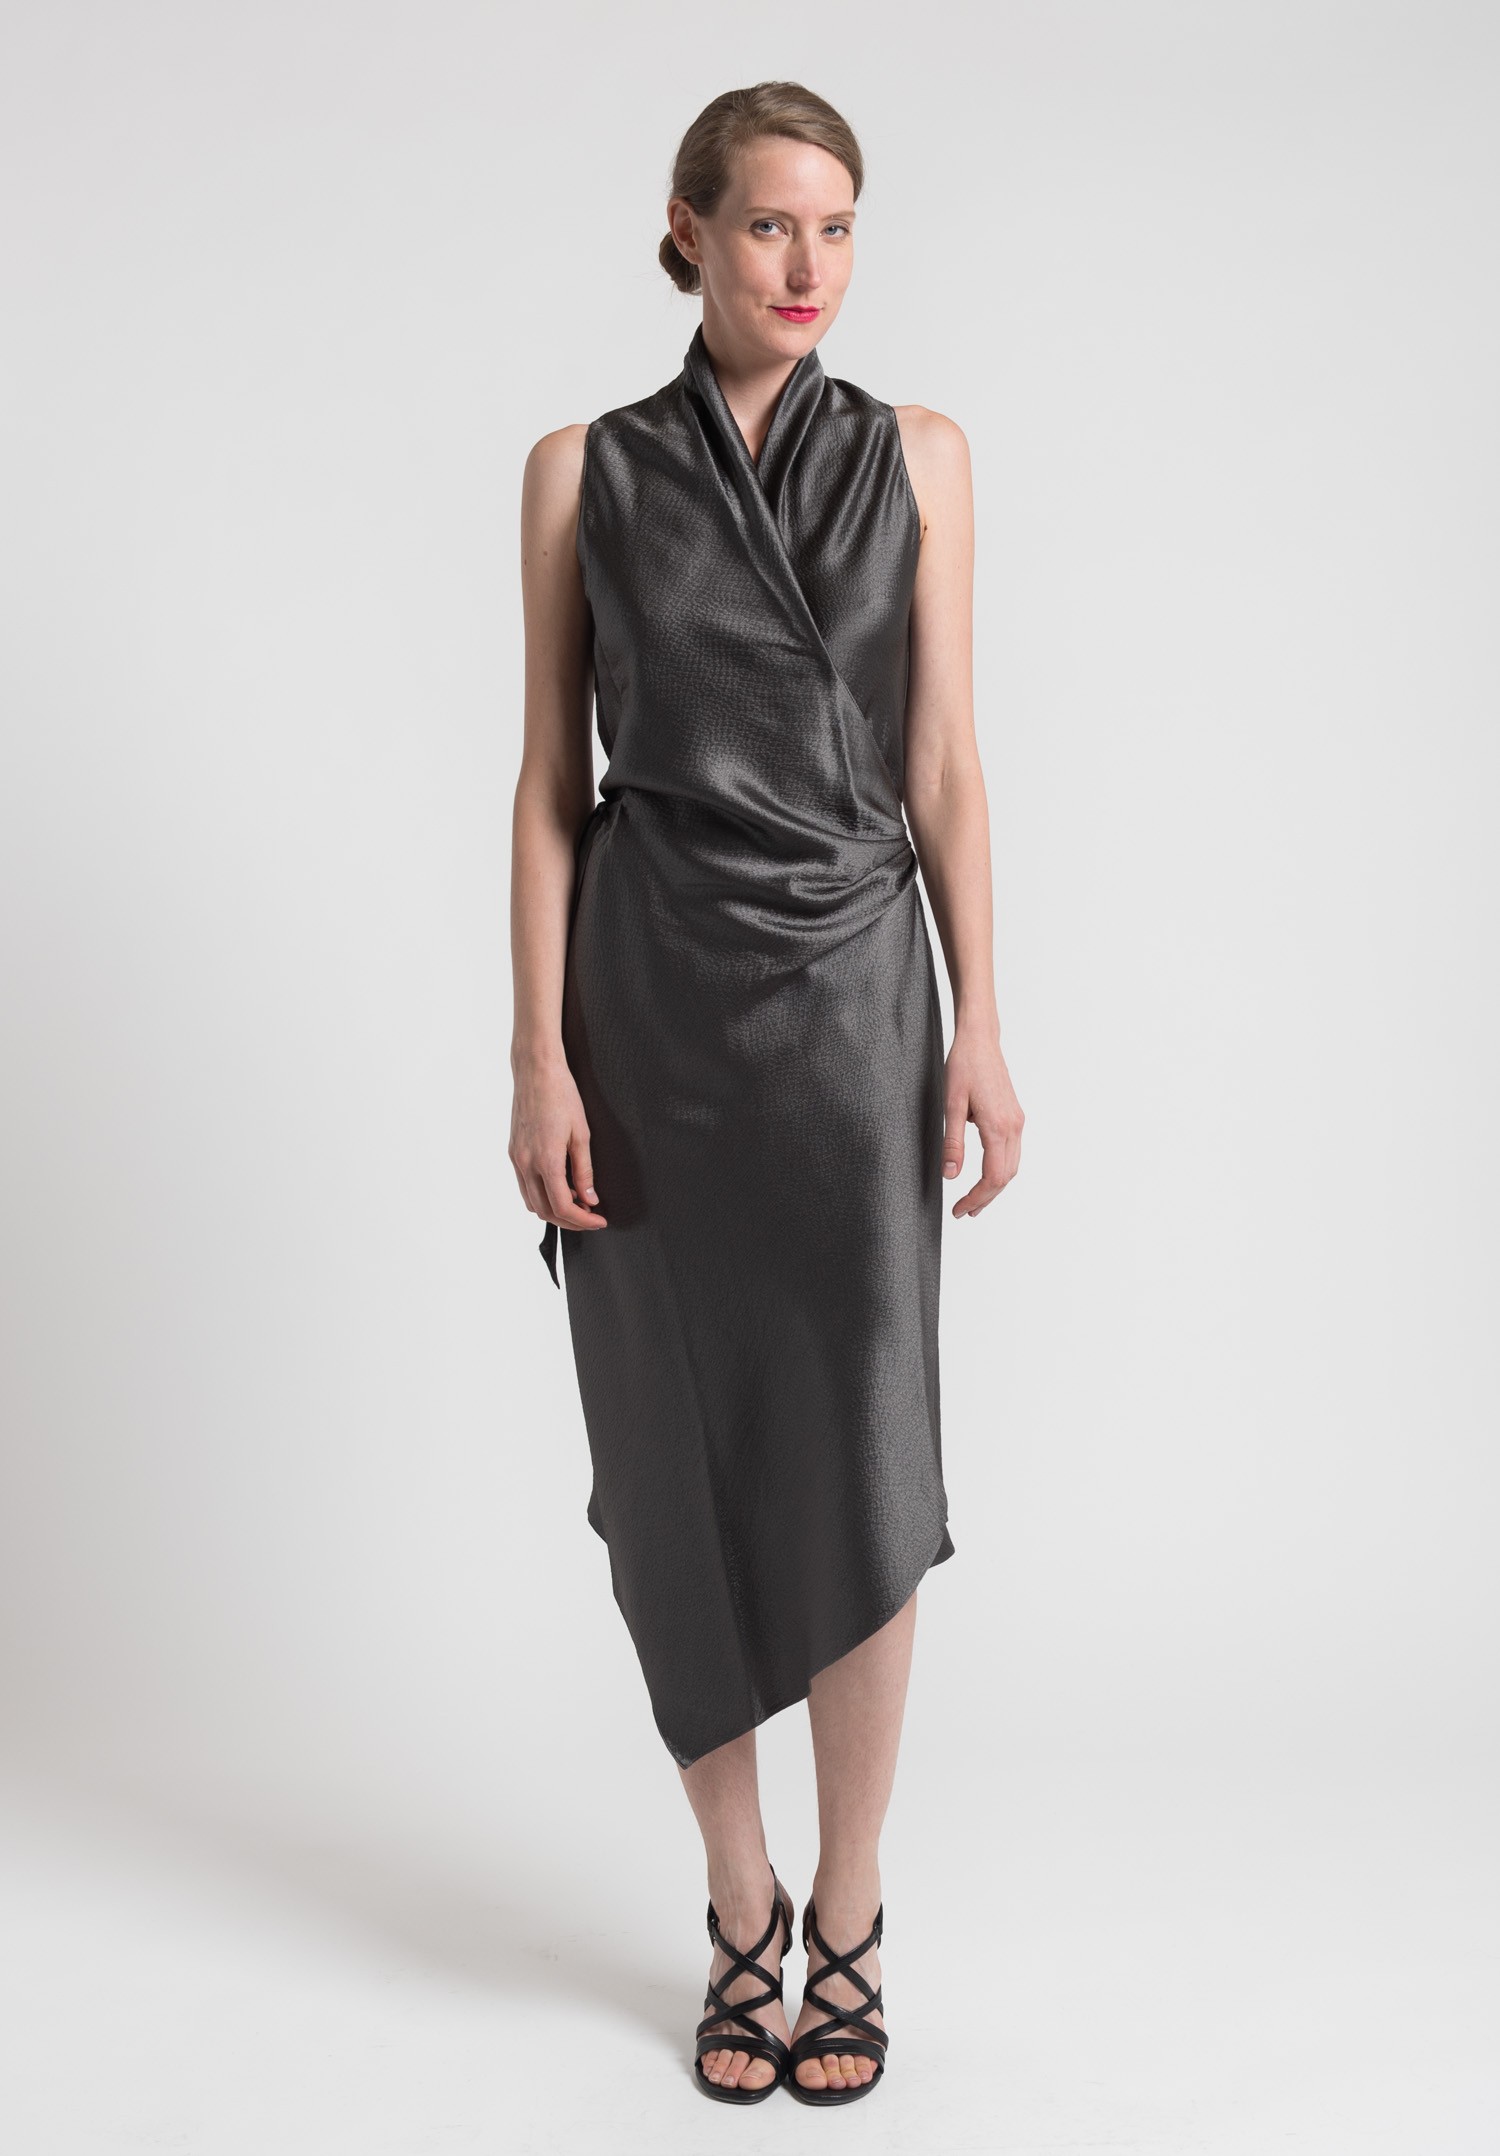 Peter Cohen Sleeveless Hammered Silk Victor Dress in